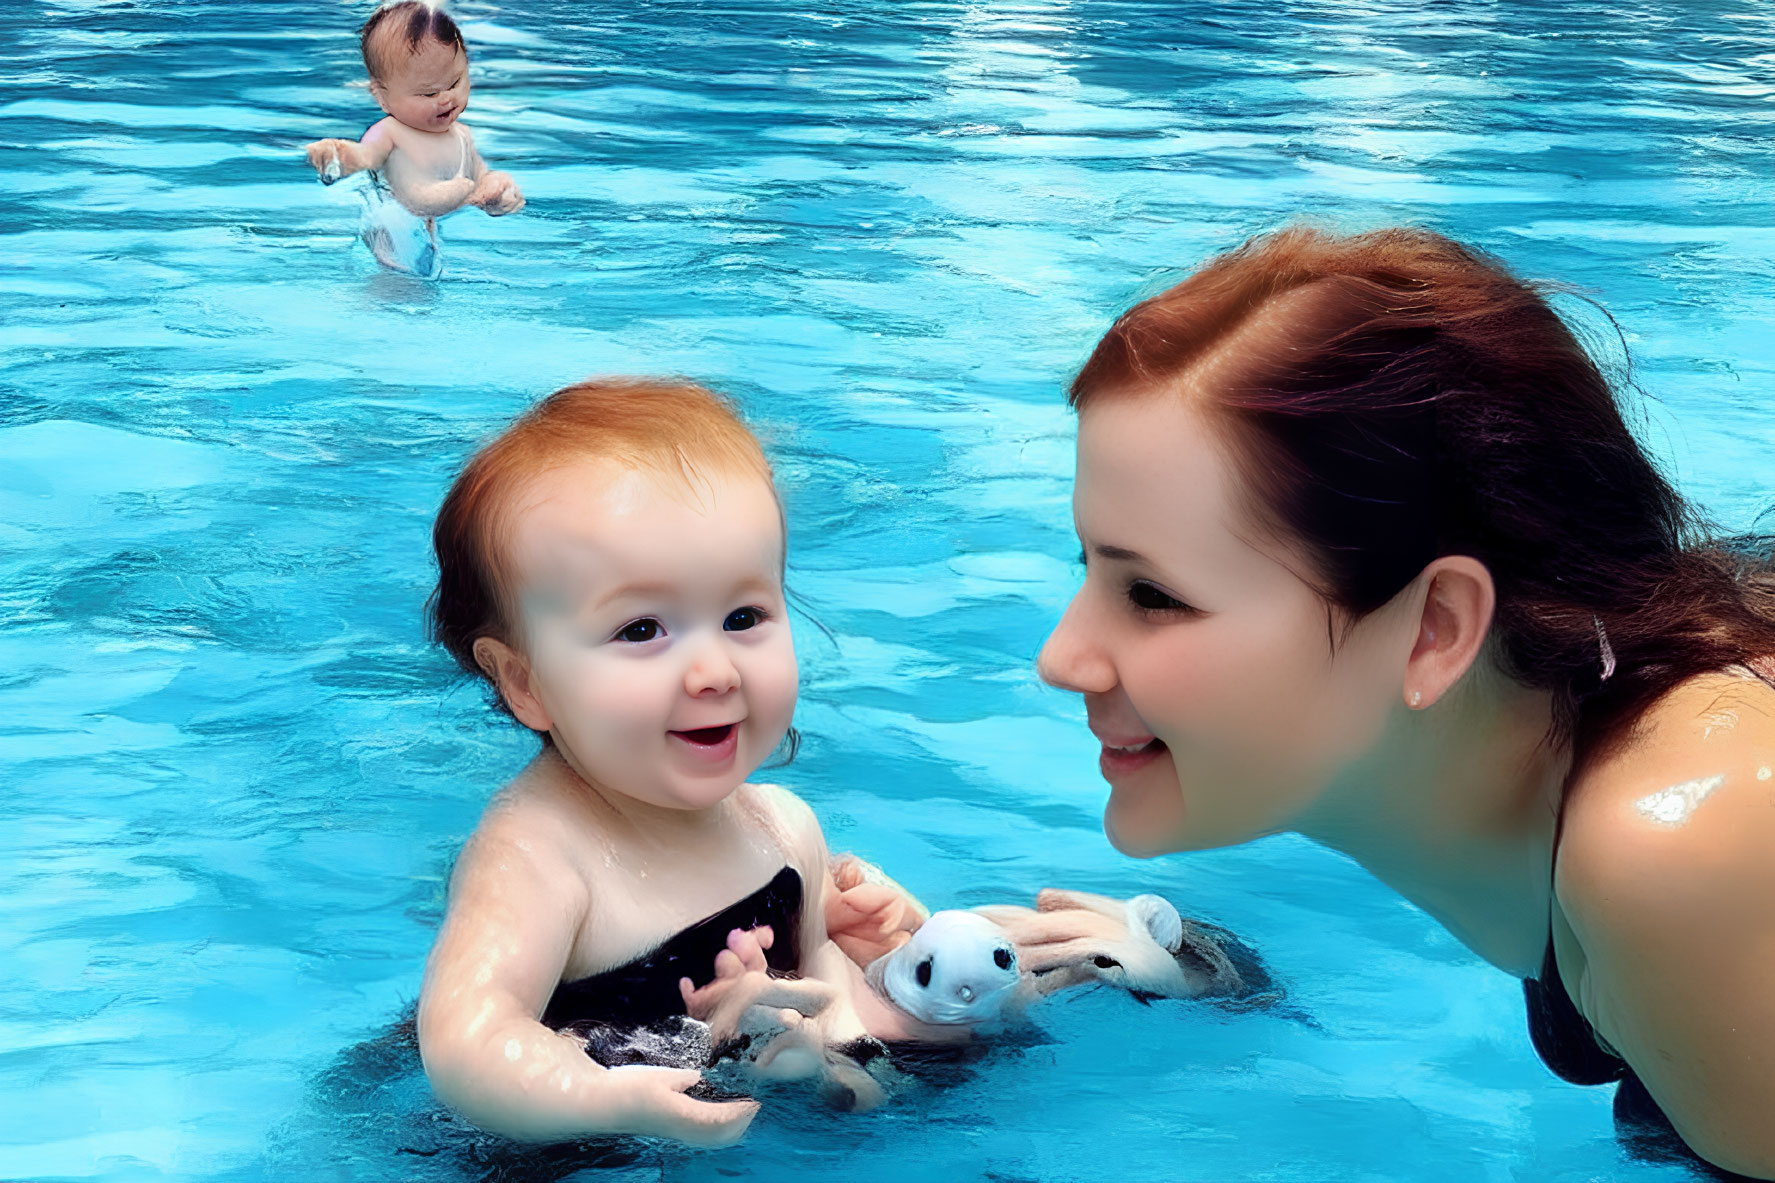 Woman and smiling baby in pool with toy, another child in background